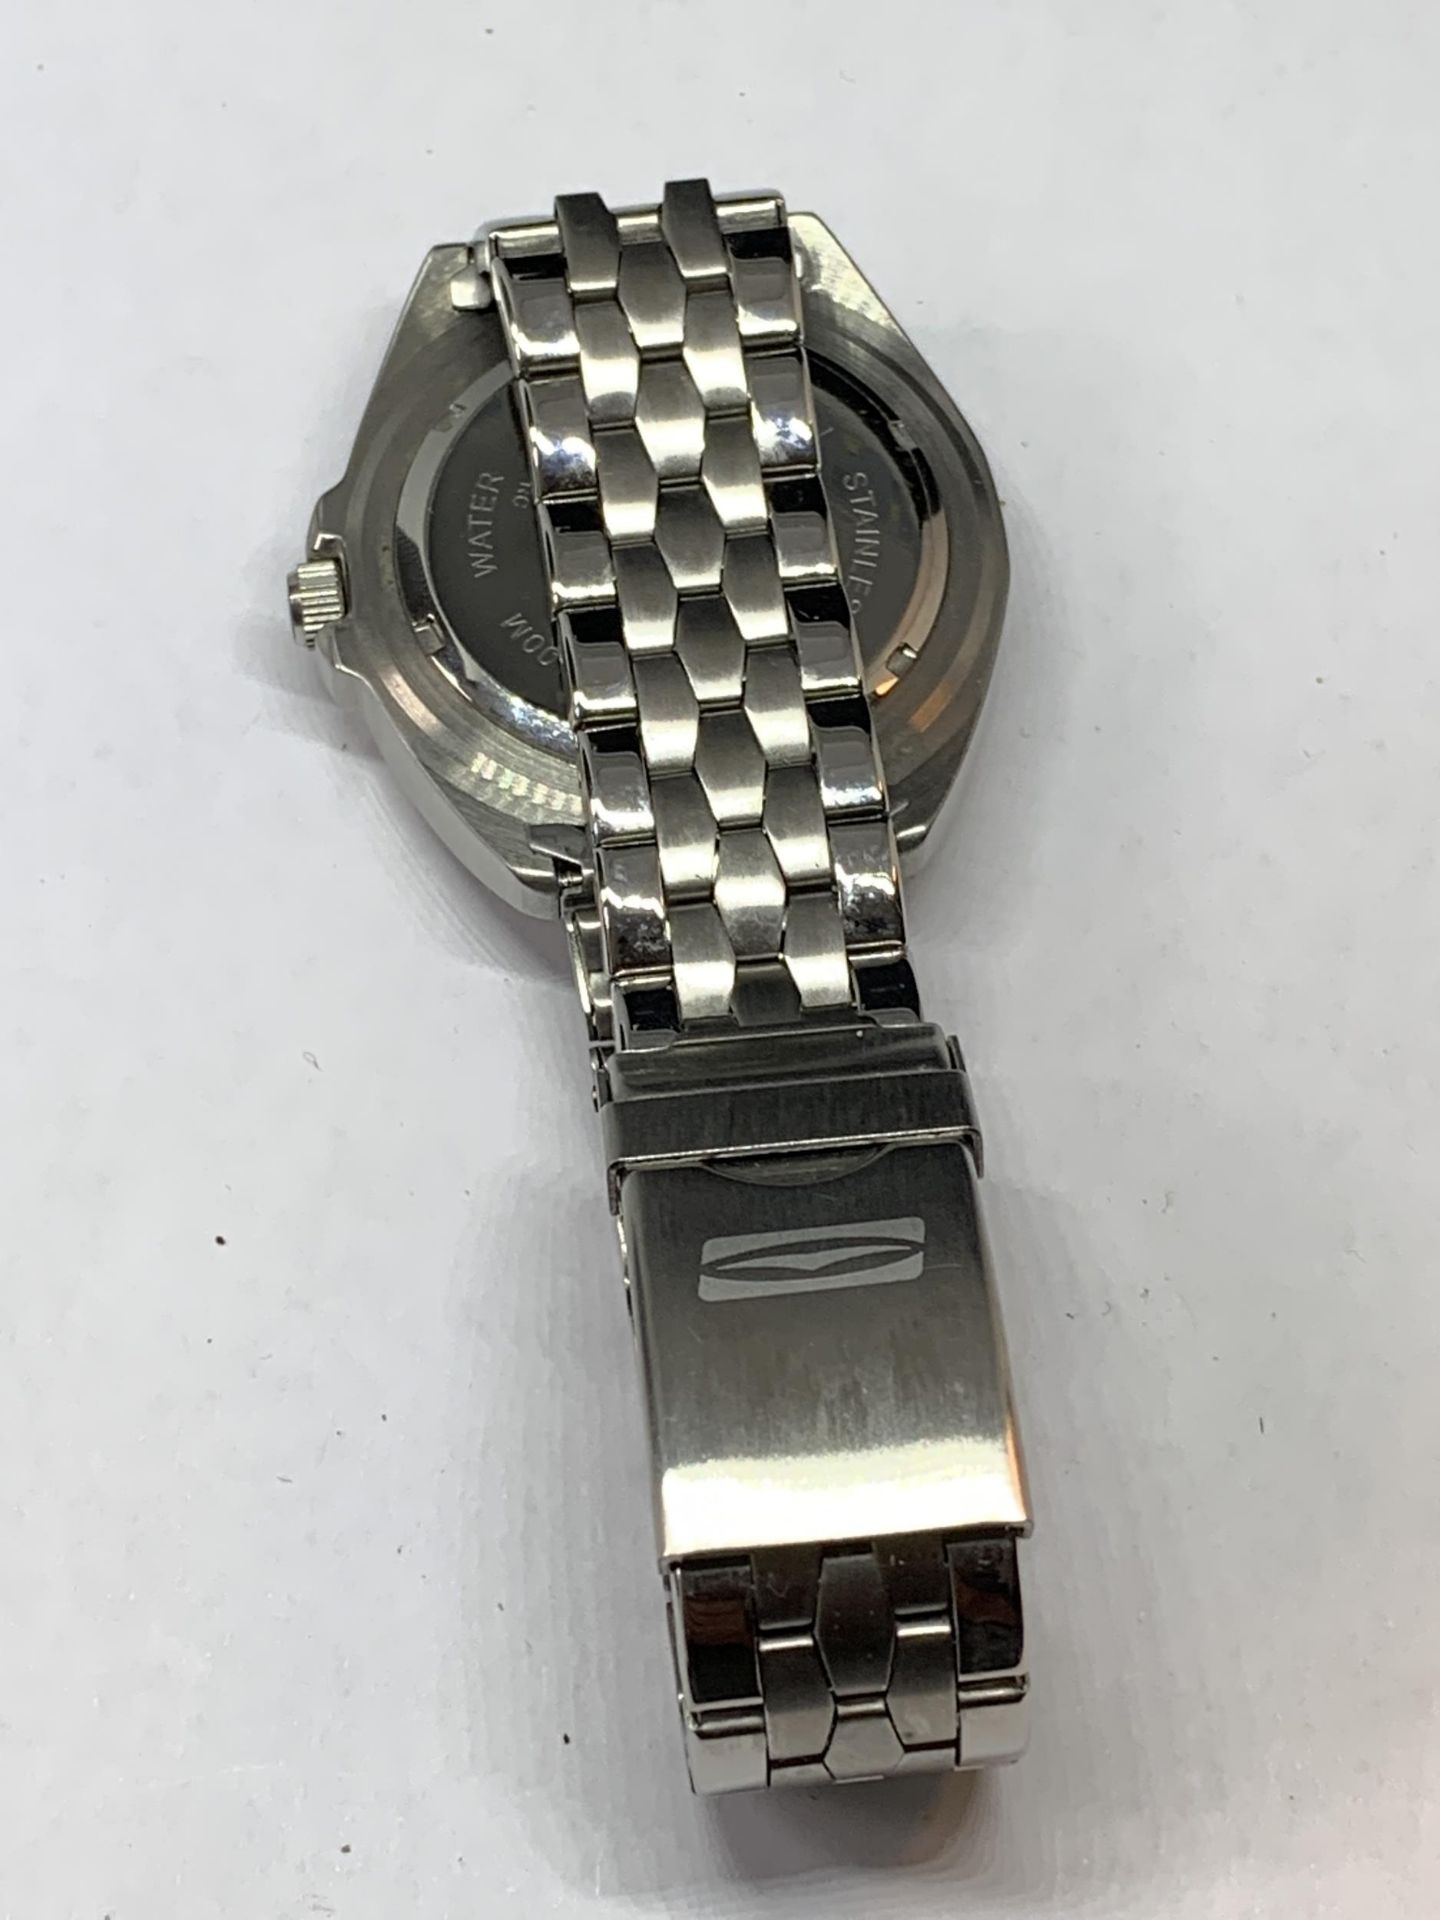 A GUL DIVERS WRIST WATCH SEEN WORKING BUT NO WARRANTY - Image 3 of 3